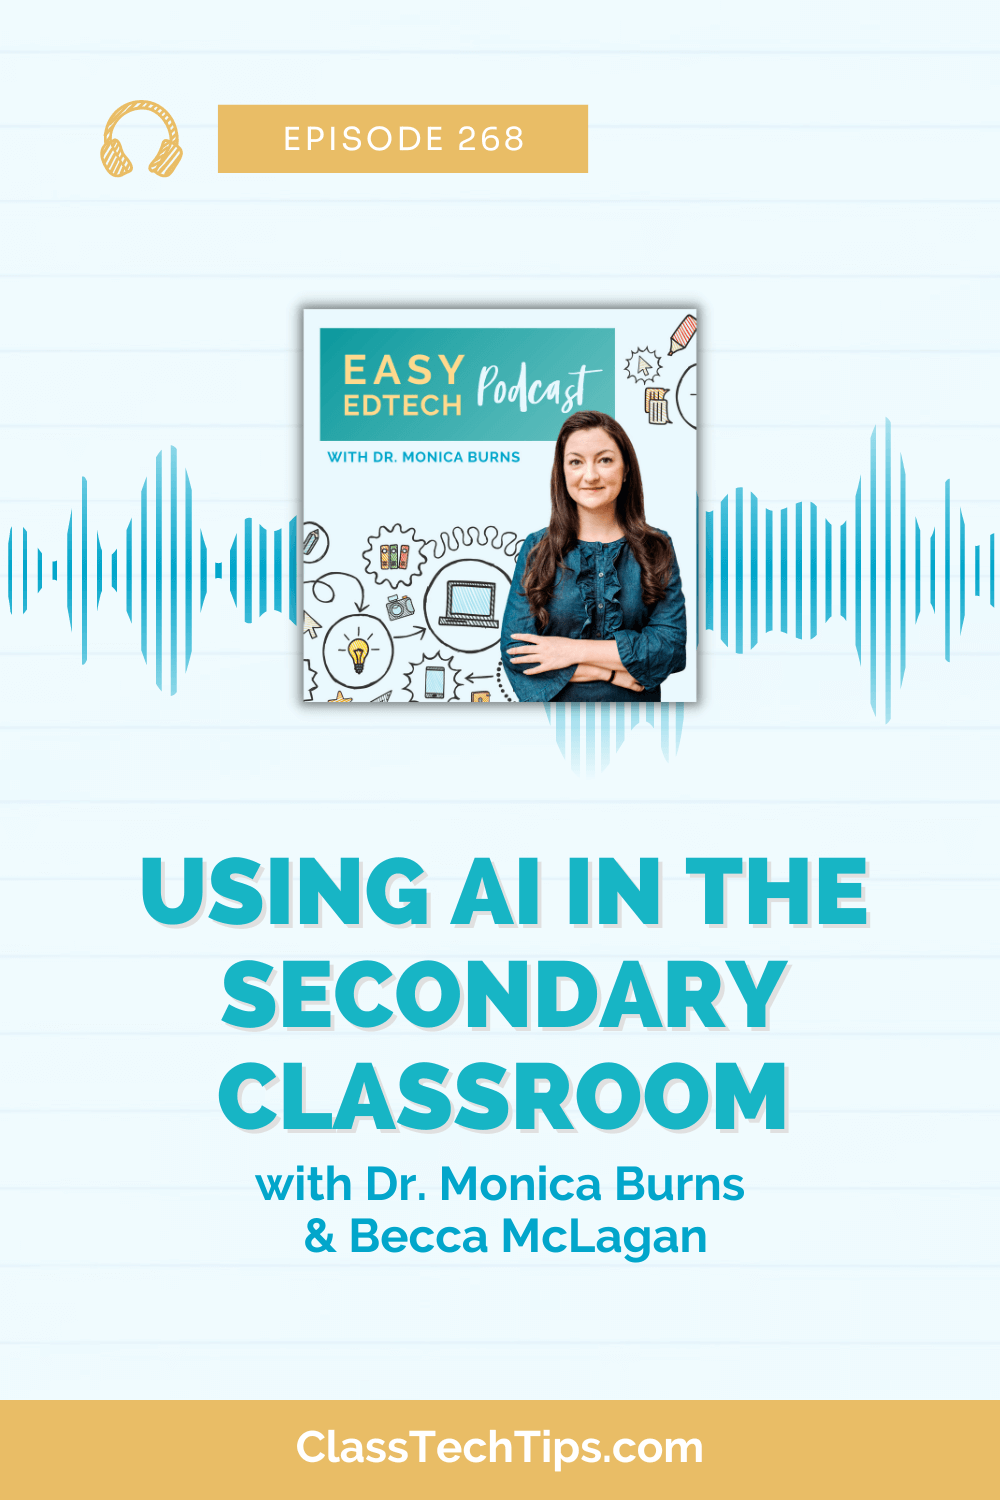 Promotional image for Episode 268 of the Easy EdTech Podcast with Dr. Monica Burns and guest Becca McLagan on the topic 'Using AI in the Secondary Classroom,' showcasing the podcast's branding and a picture of the host.